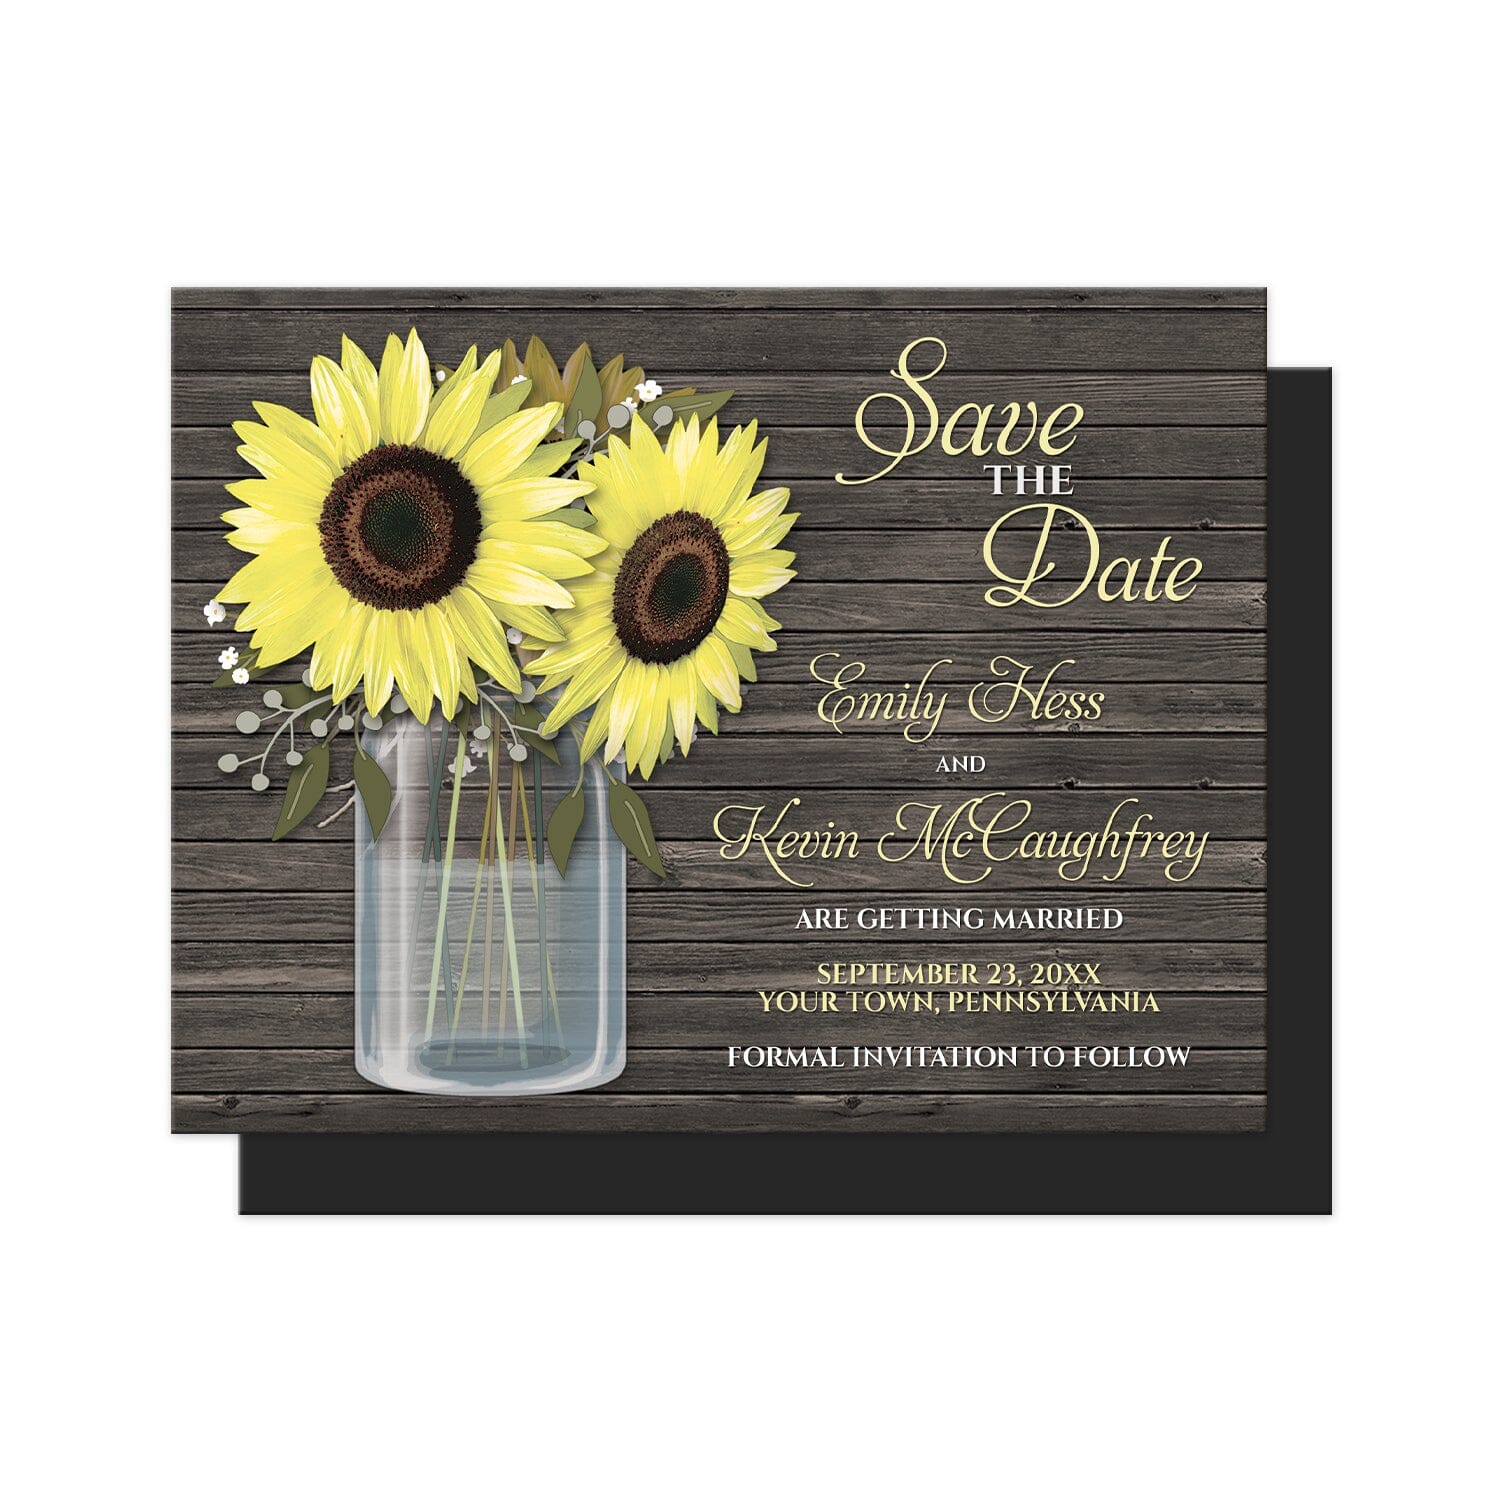 Rustic Sunflower Wood Mason Jar Save the Date Magnets at Artistically Invited. Southern country-inspired rustic sunflower wood mason jar save the date magnets with big yellow sunflowers, small accents of baby's breath, and green leaves in a glass mason jar illustration. Your personalized wedding date details are custom printed in yellow and white to the right of the sunflowers and mason jar design over a dark brown wood background.